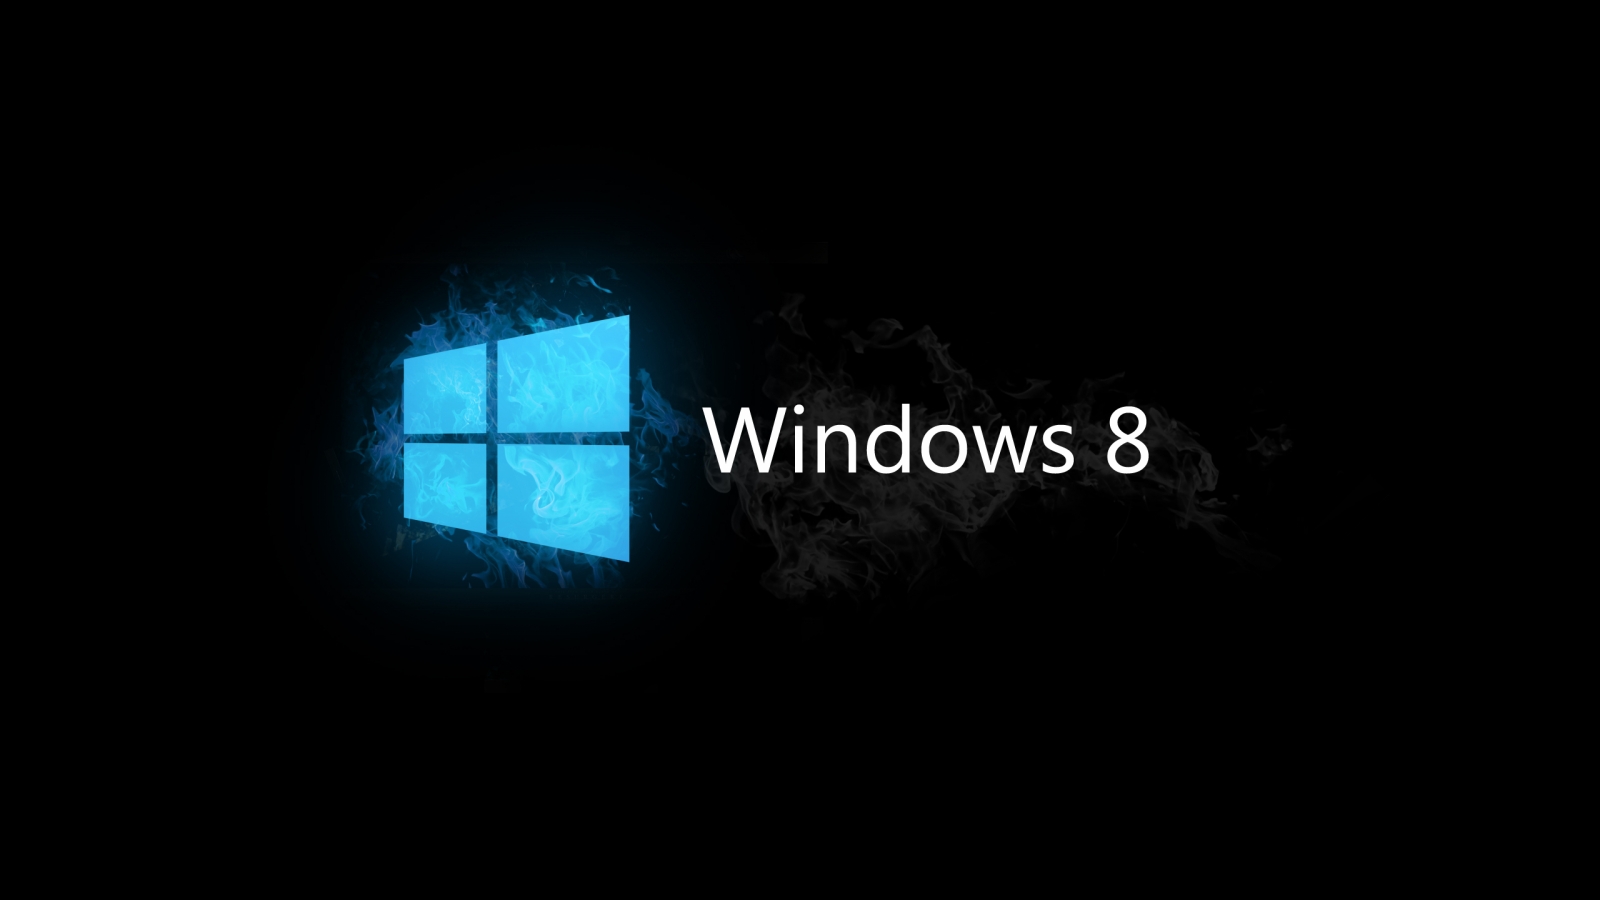 Windows 8 Blue and Black for 1600 x 900 HDTV resolution